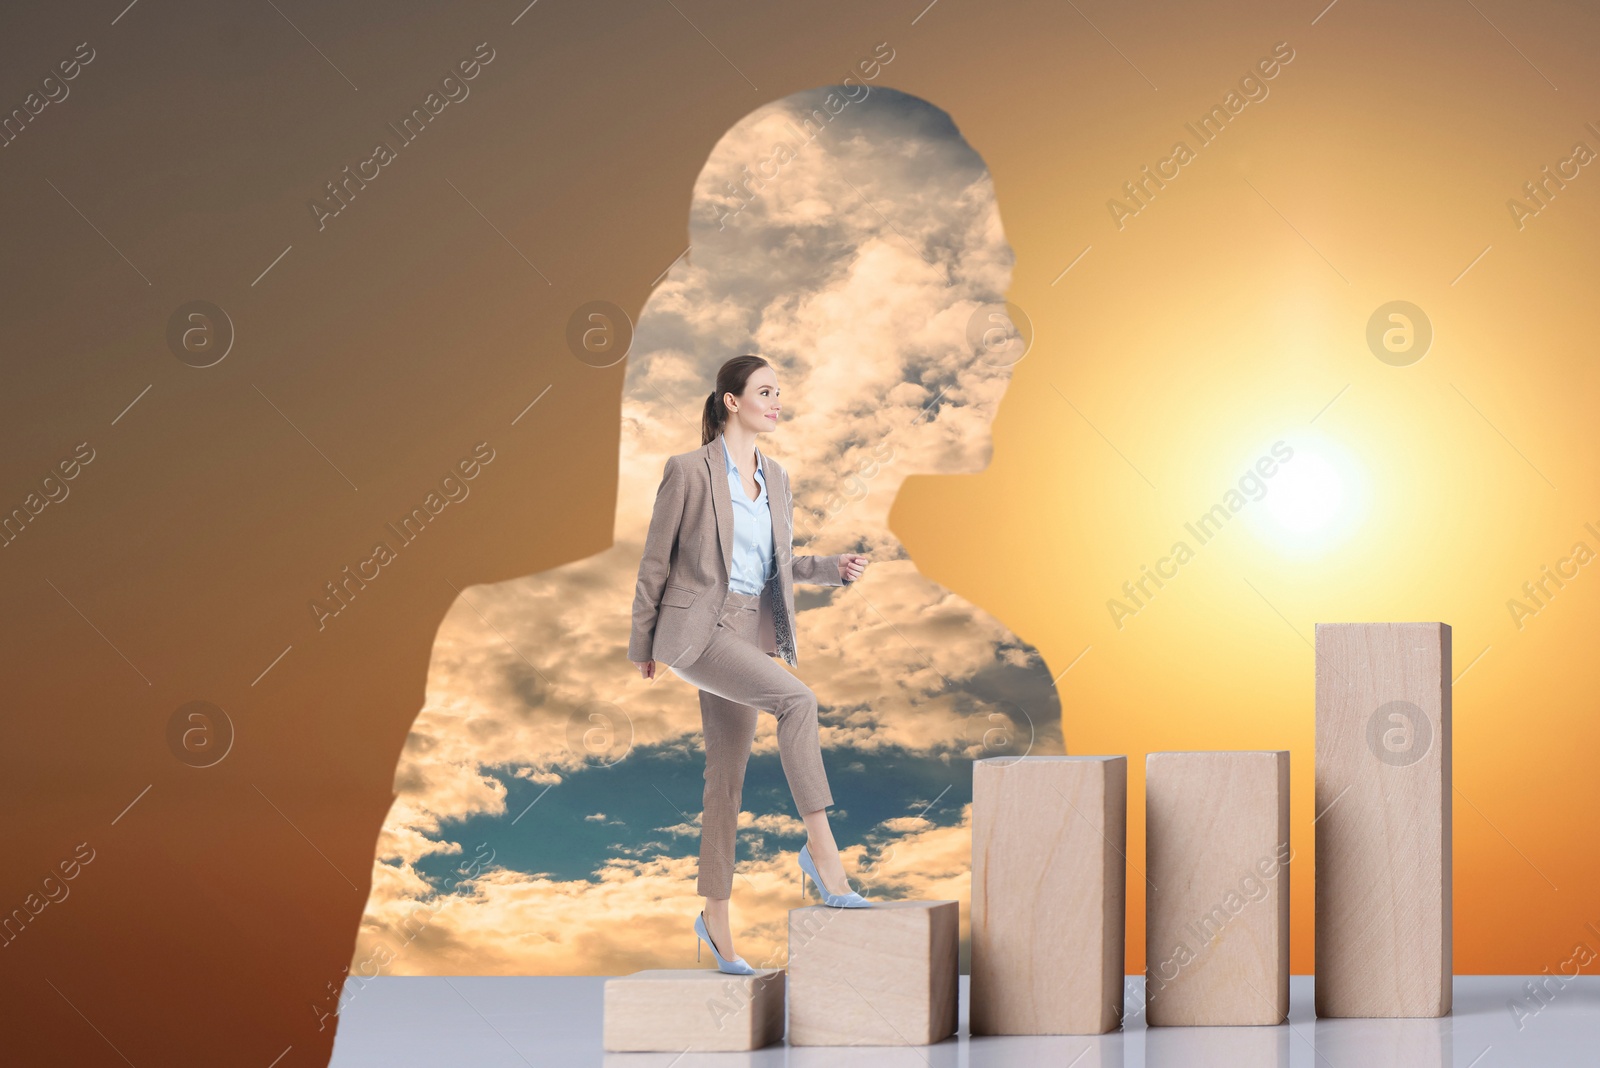 Image of Thinking about steps to success. Businesswoman climbing up stairs of wooden blocks inside of woman's silhouette